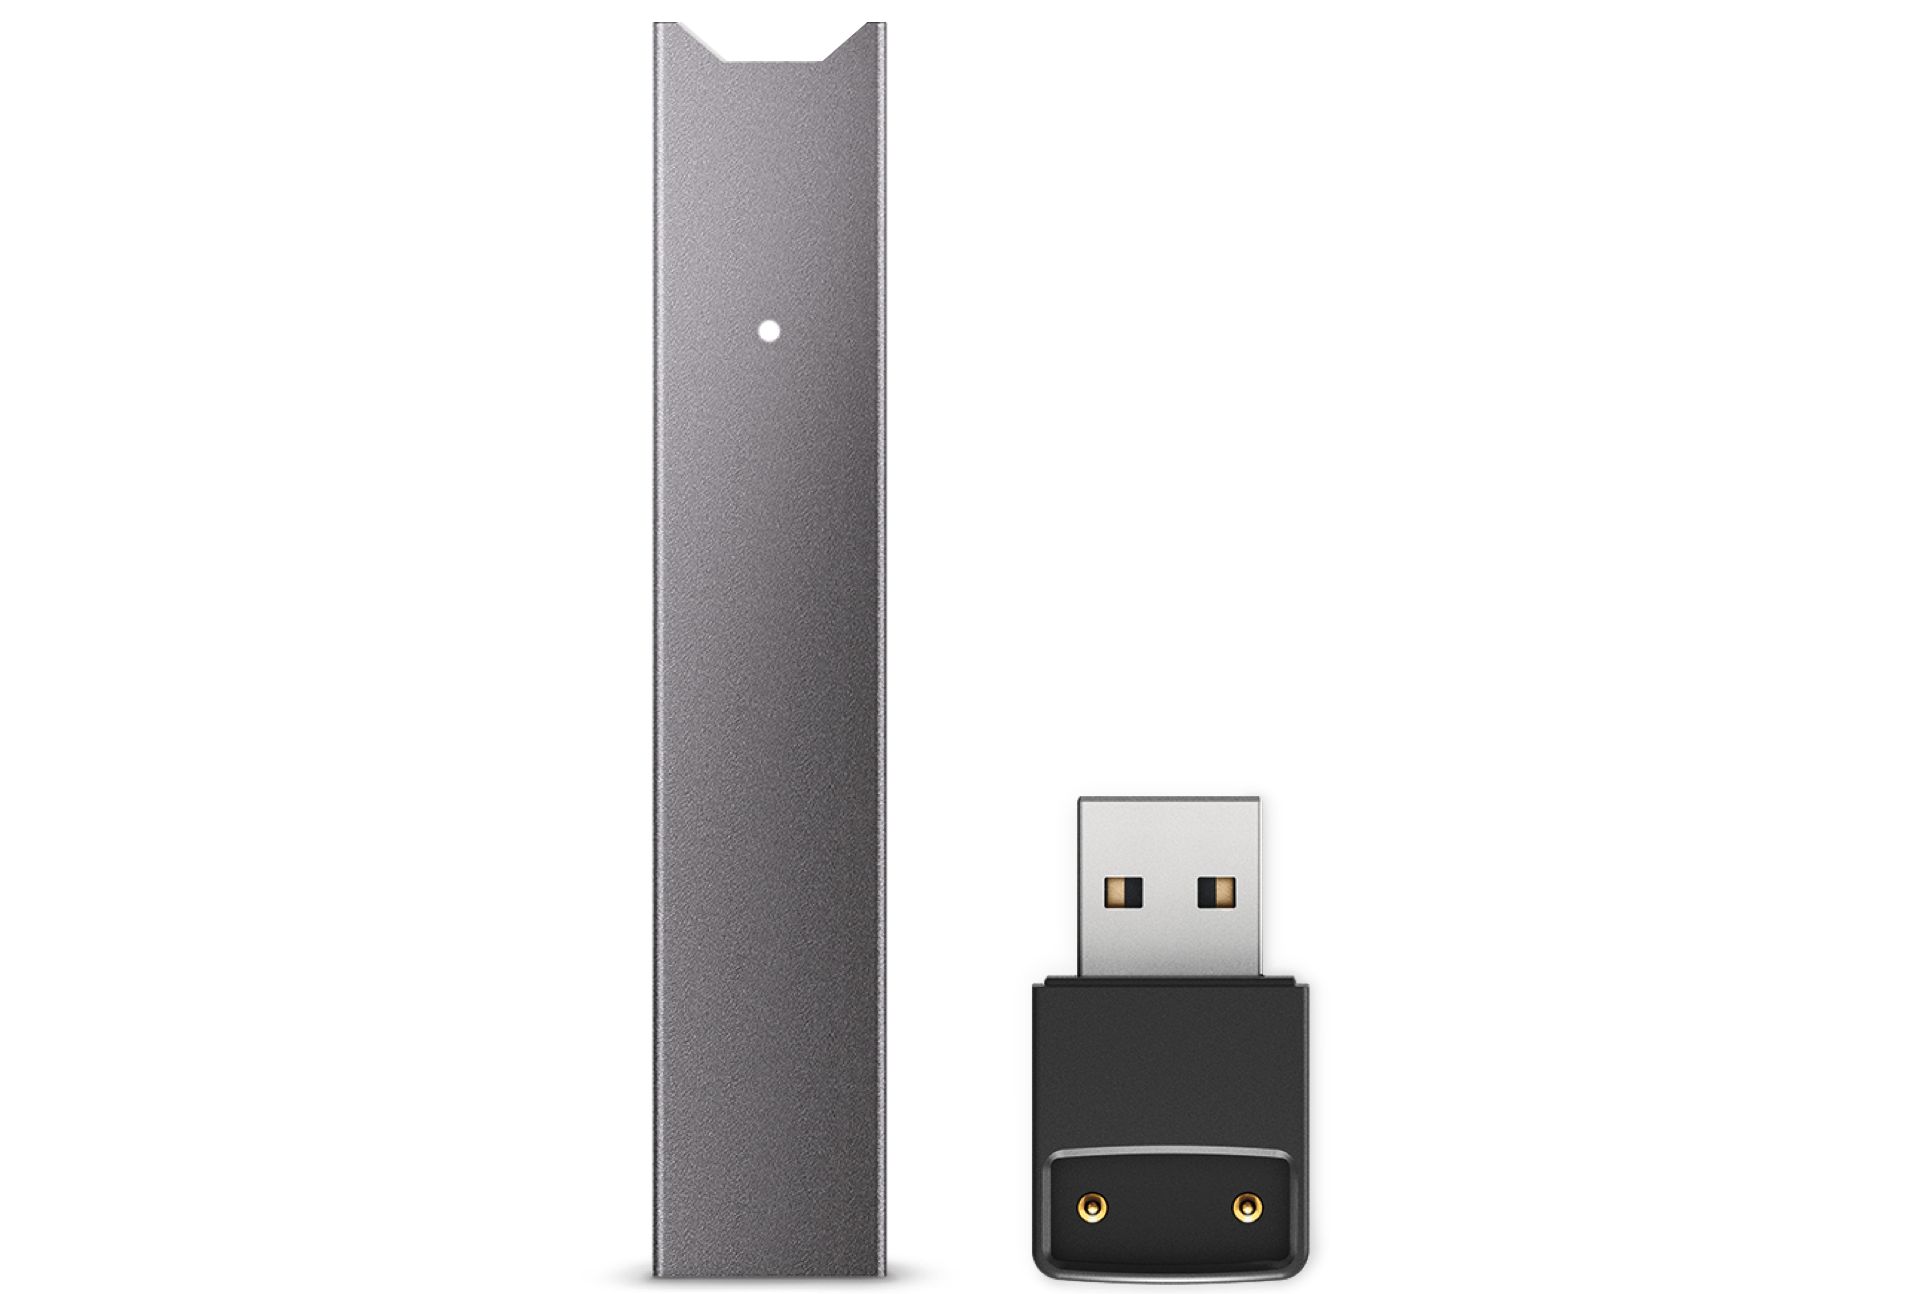 JUUL device and charger